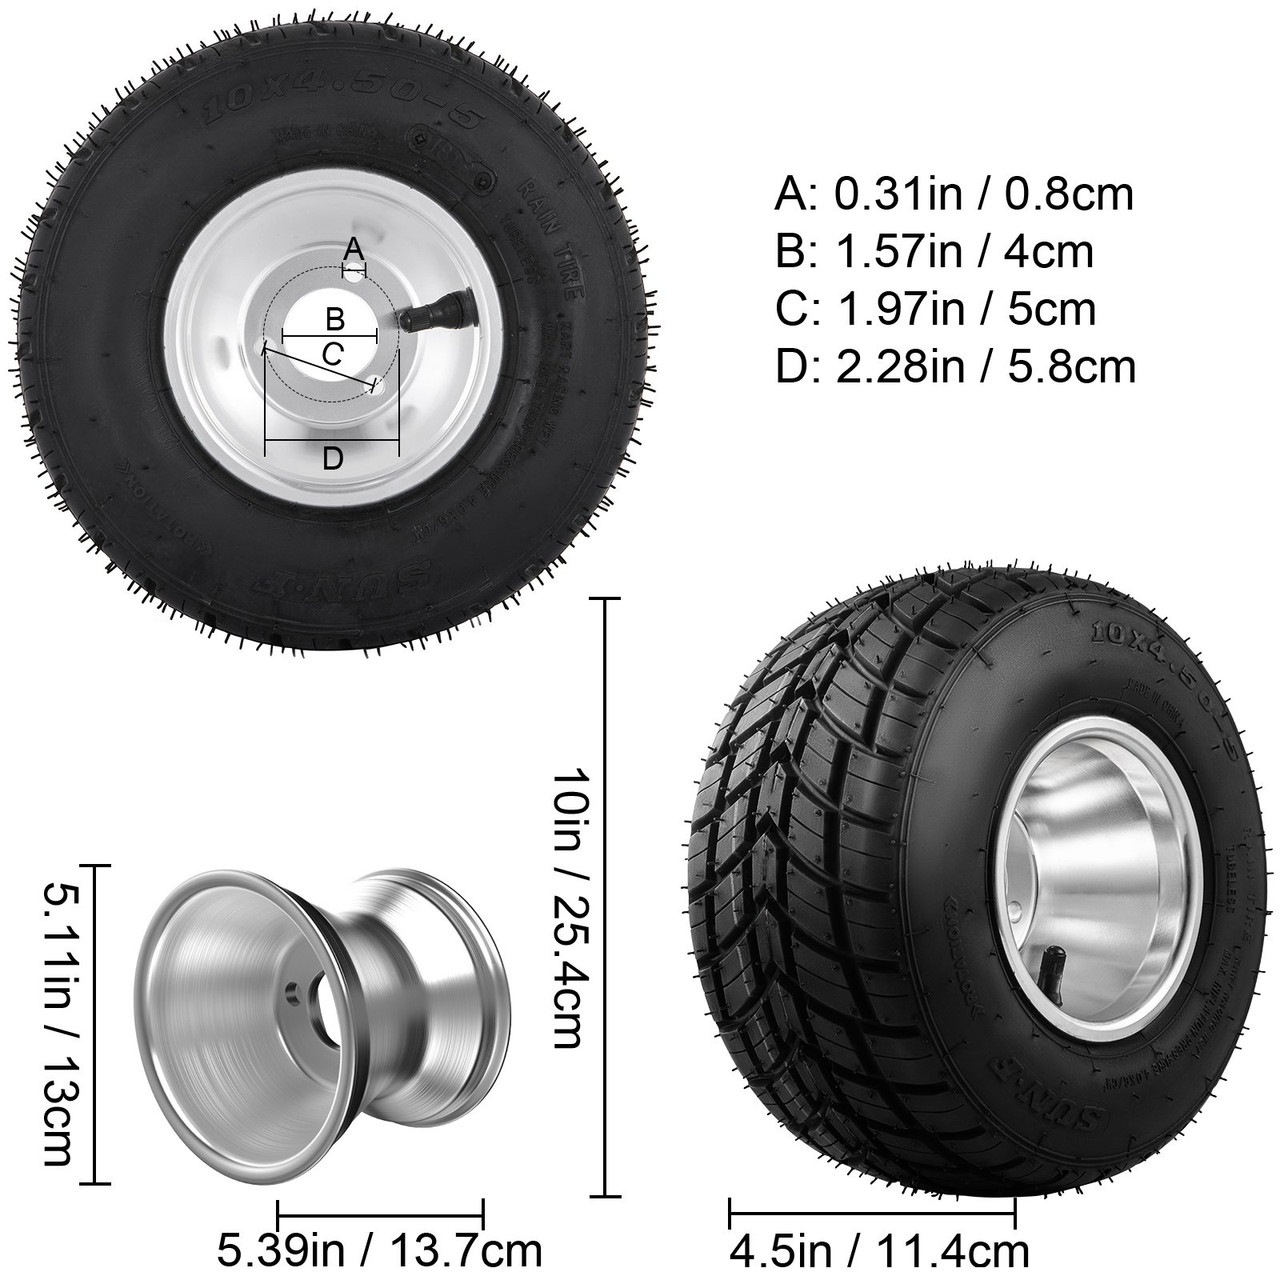 Go Kart Tires and Rims, 2pcs Front Tires Rims, Go Cart Wheels and Tires 10"x4.5" Front, HUB- Rim Fit Bolt Pattern 58 mm/2.28 inch with 3 Holes for Go Kart, Drift Trike, Buggy